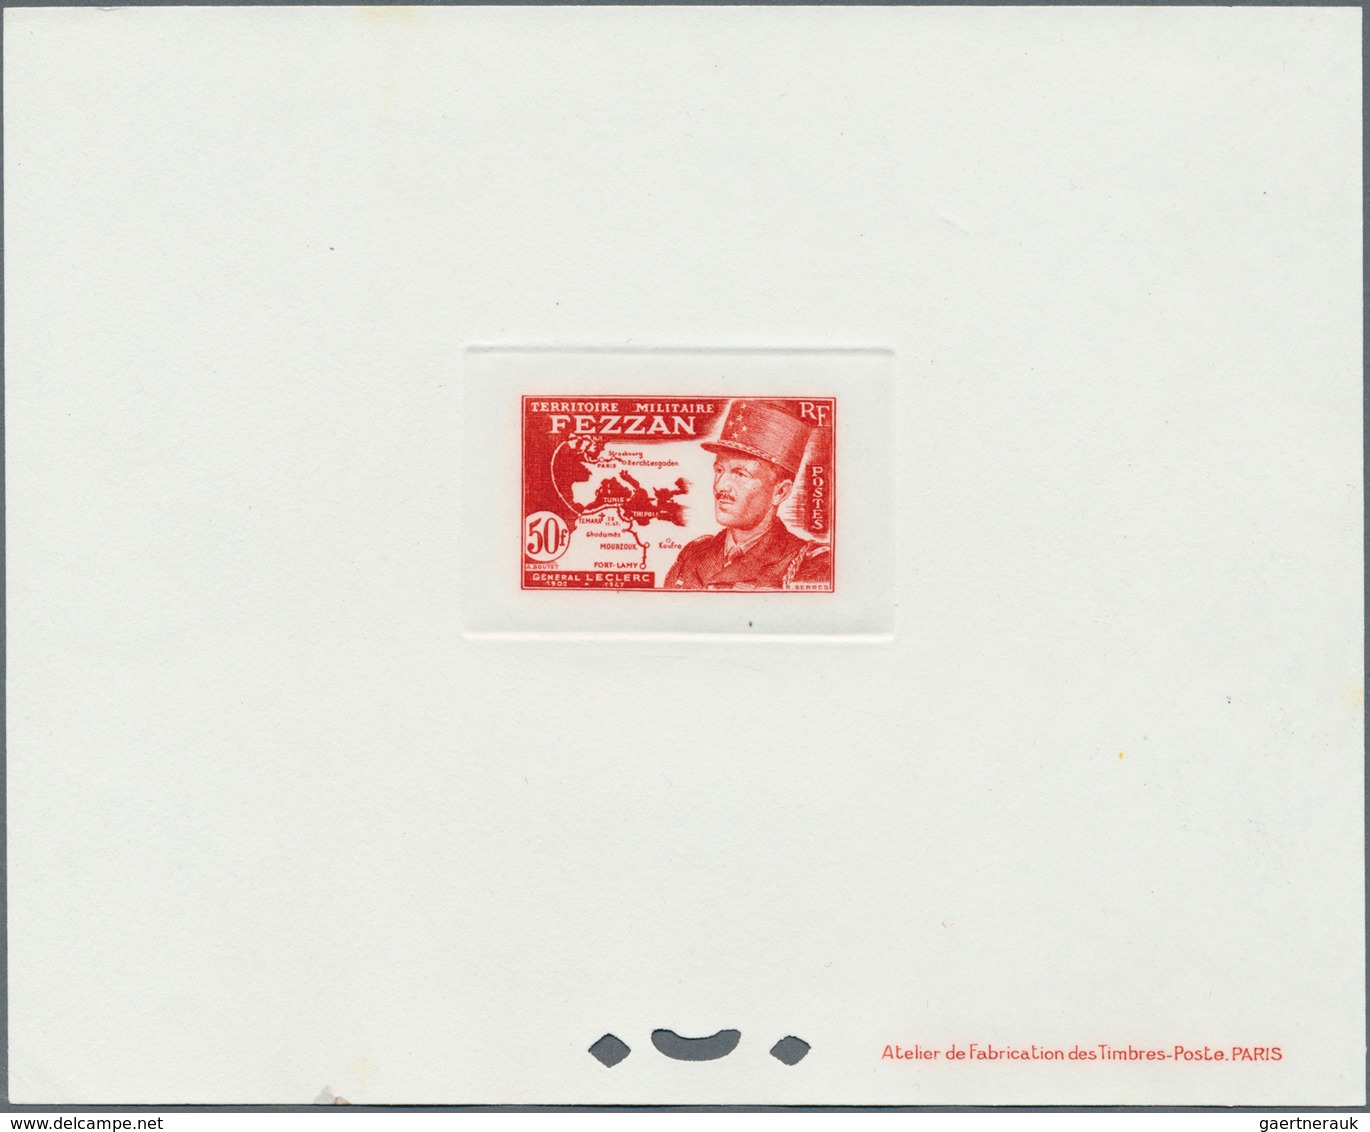 Fezzan: 1949. Lot with eight single epreuves d'atelier for some stamps of the definitives set (Sc #2